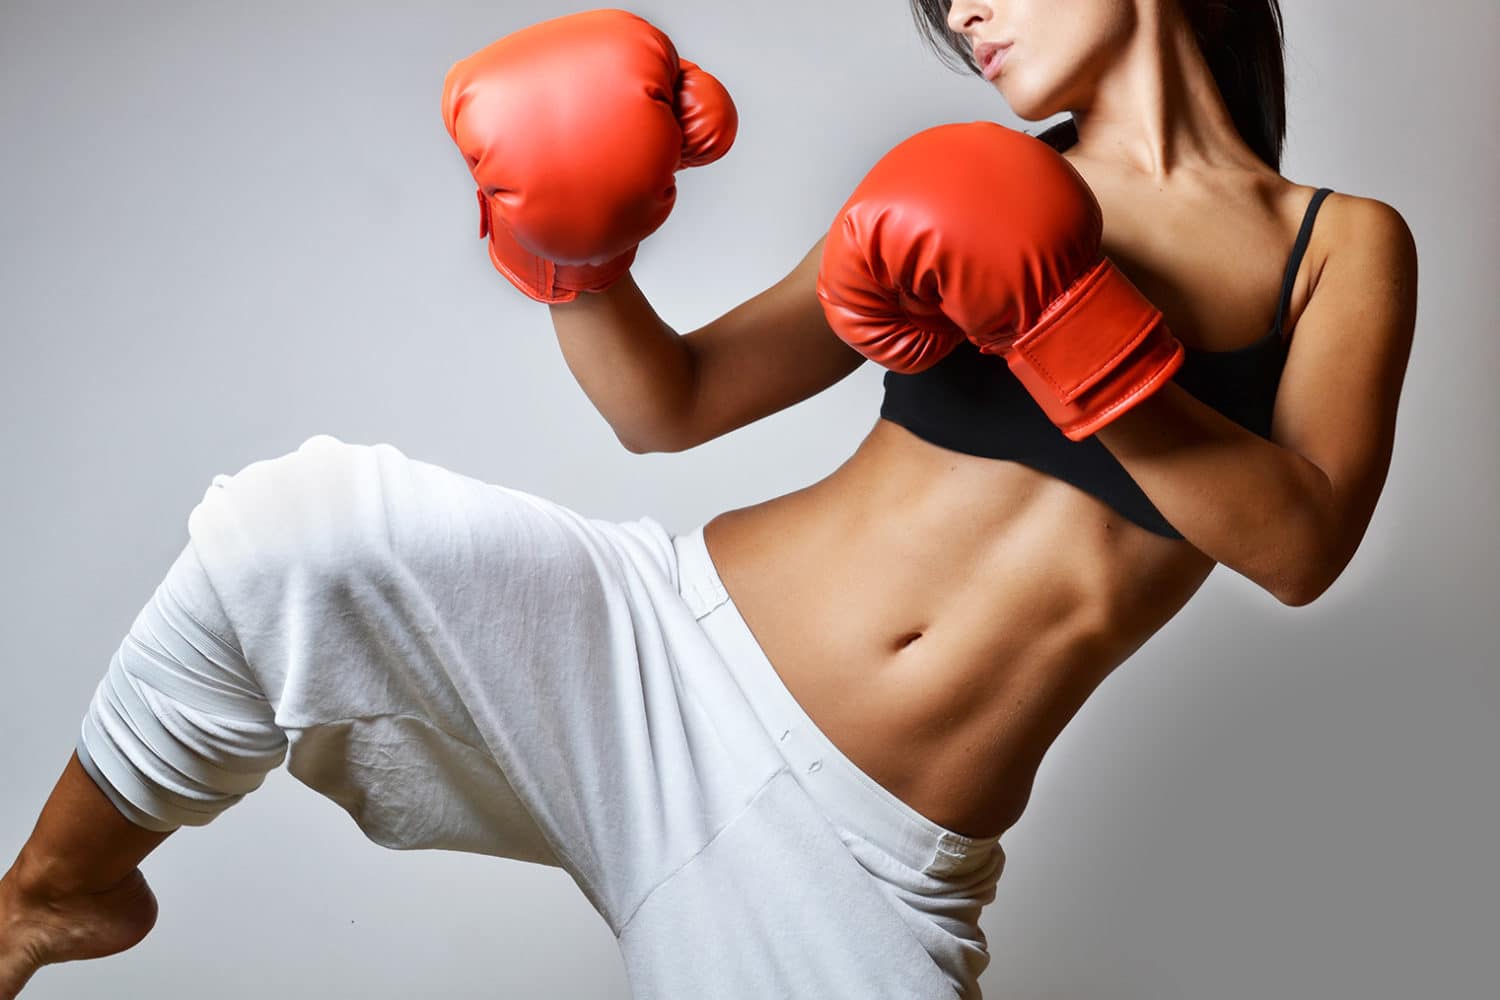 Women's Kickboxing: From Improved Fitness to Increased Self-Confidence